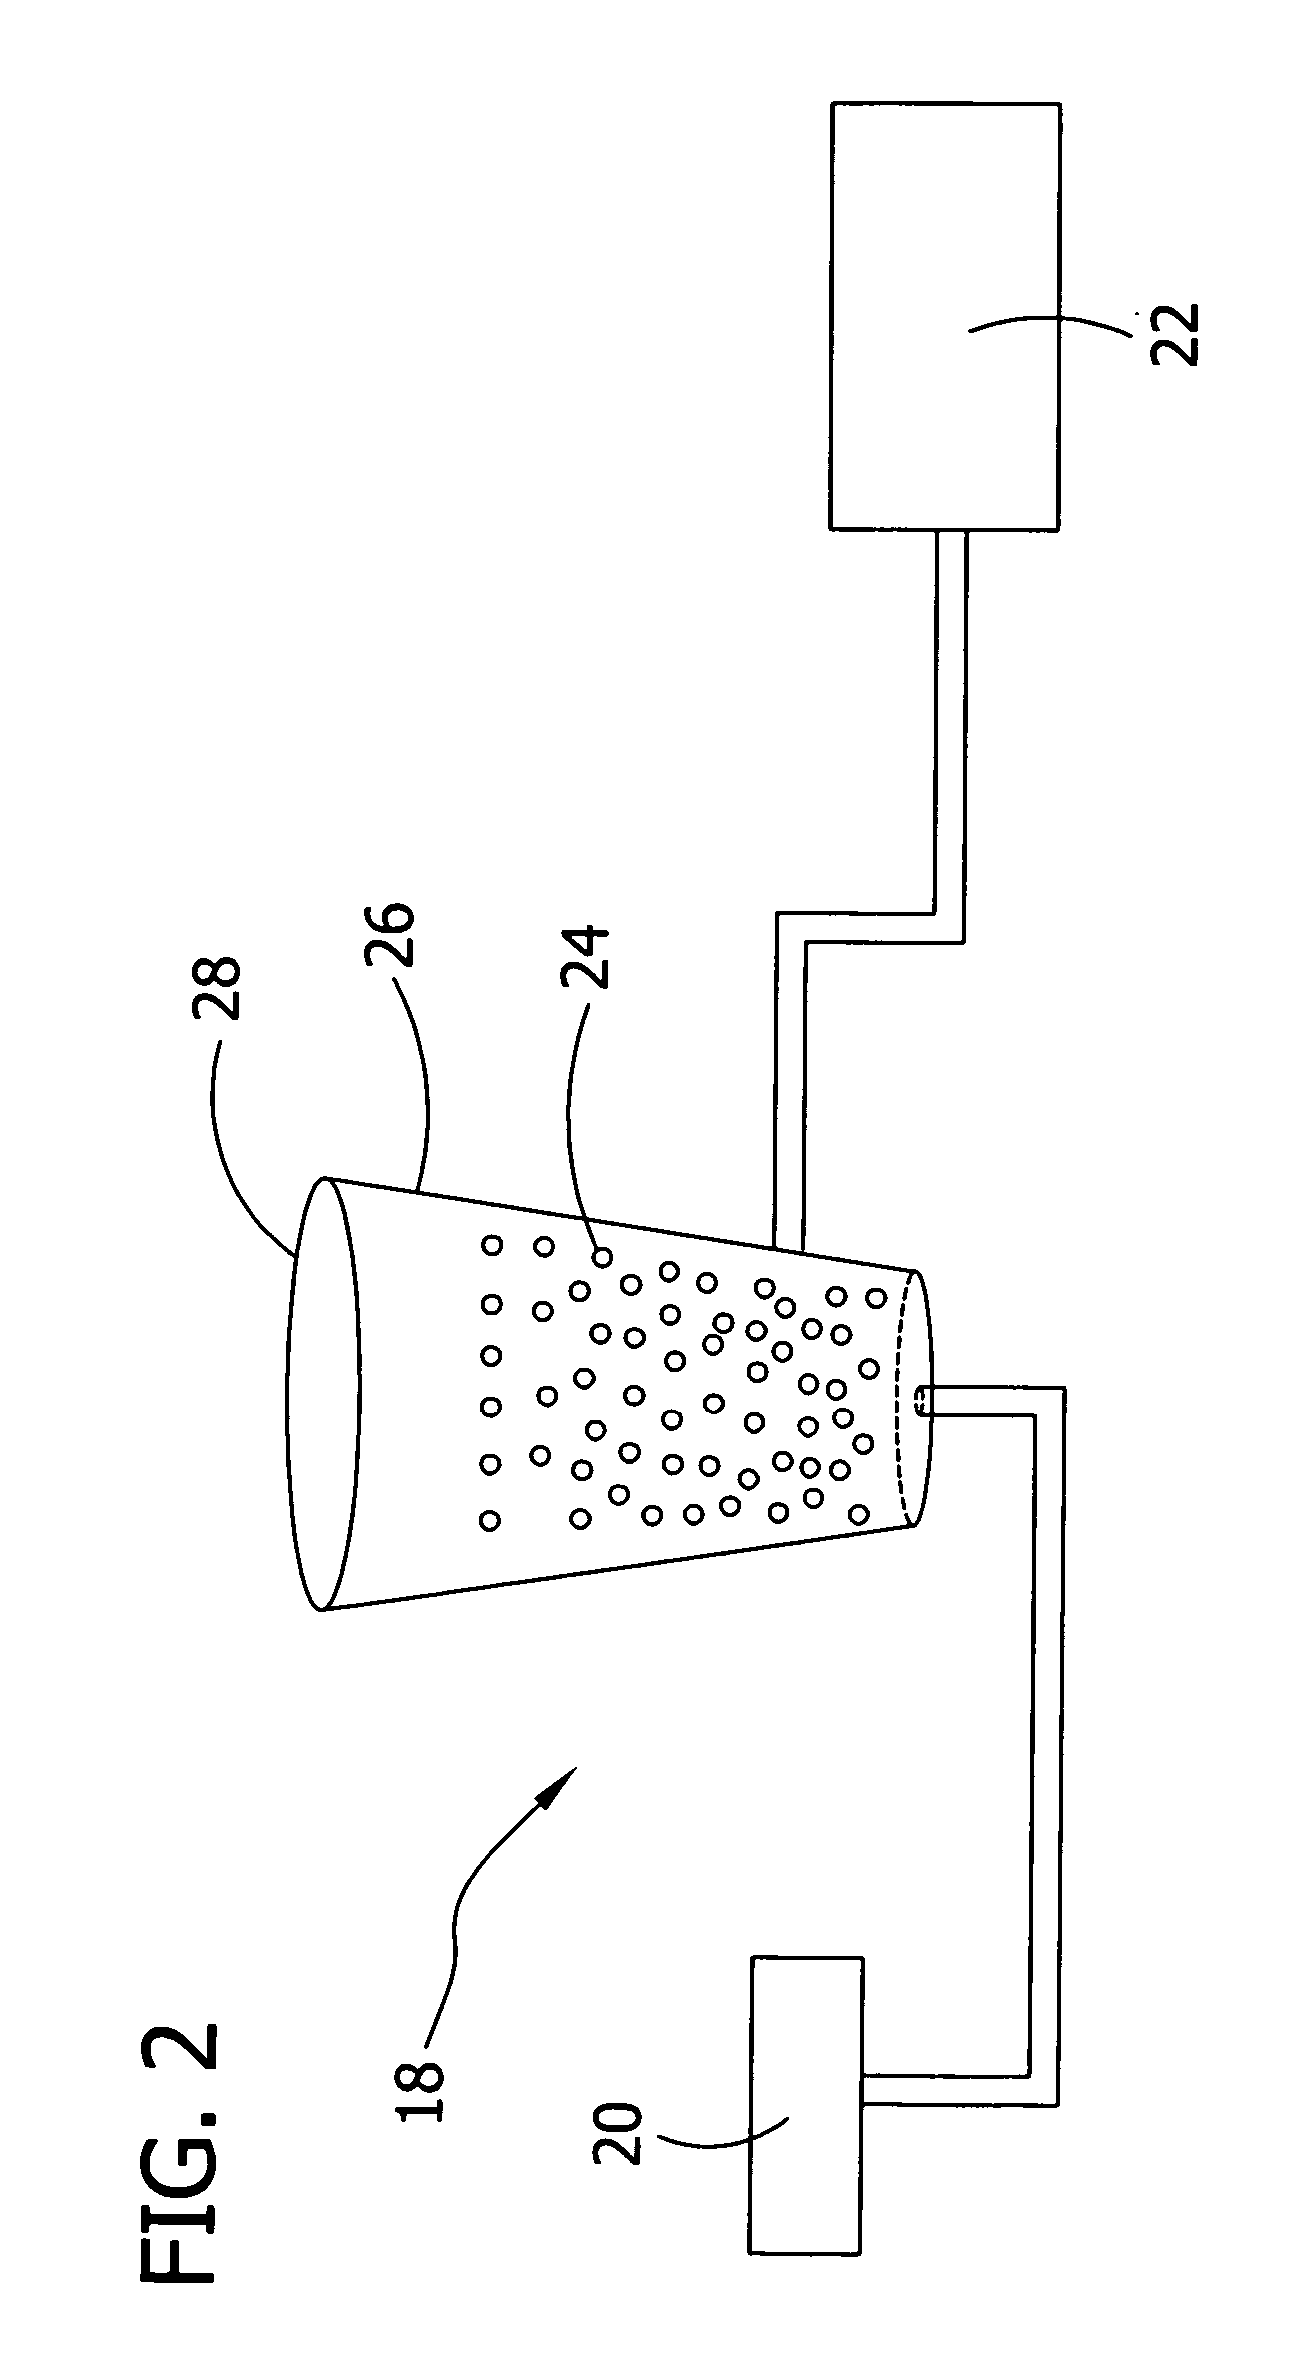 Processes for producing microencapsulated heat delivery vehicles